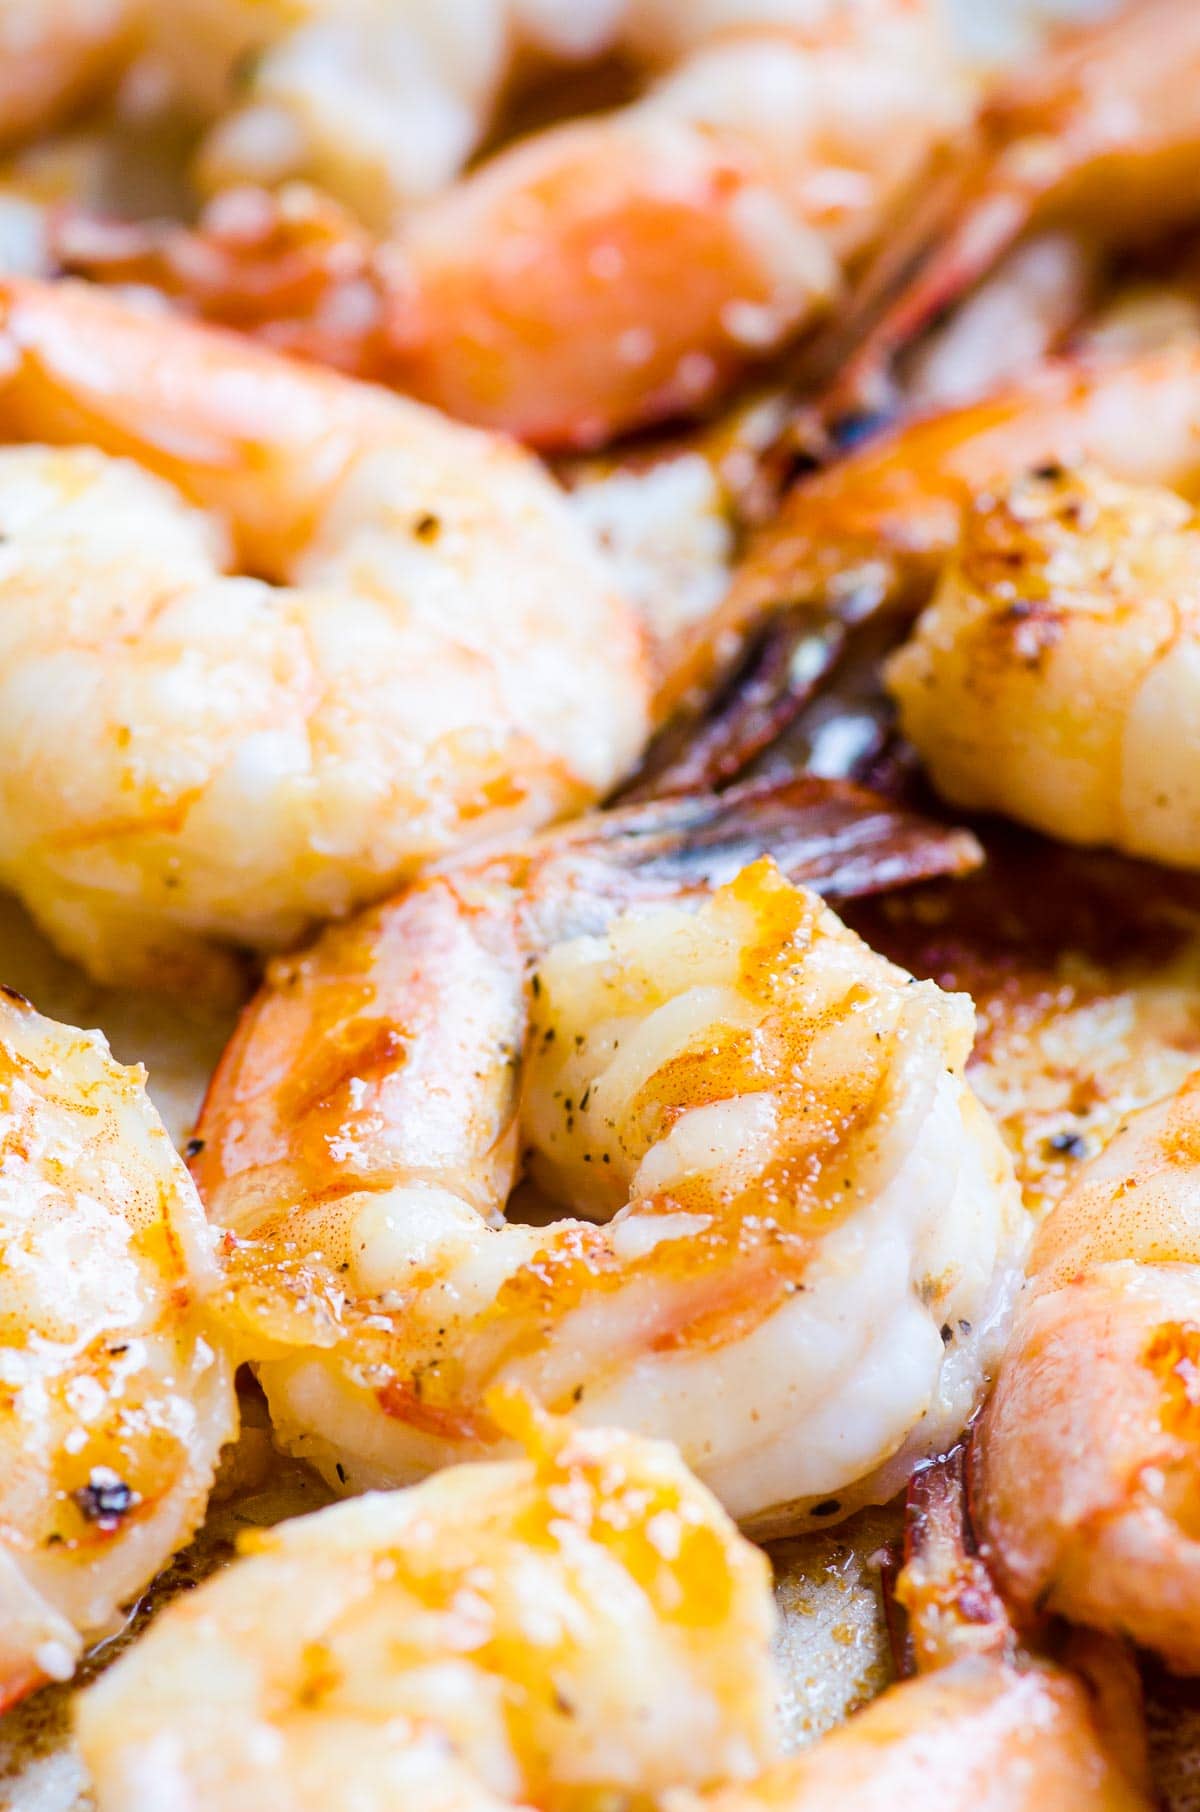 Sauteed shrimp in skillet.